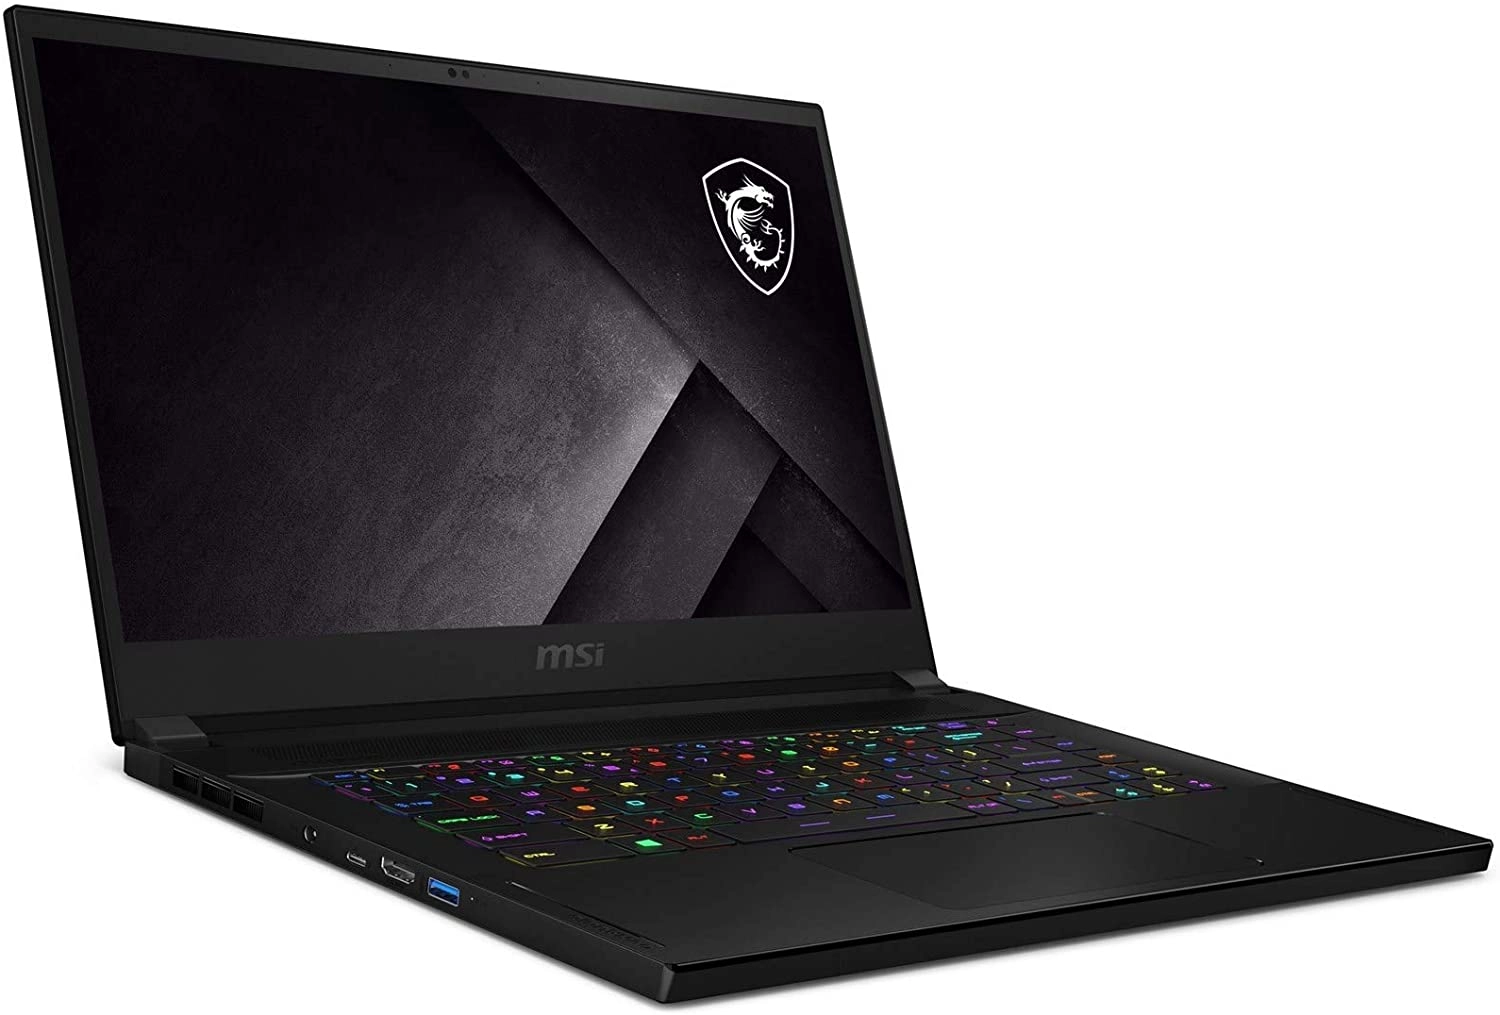 MSI GS66 Stealth 10UH-091 laptop image